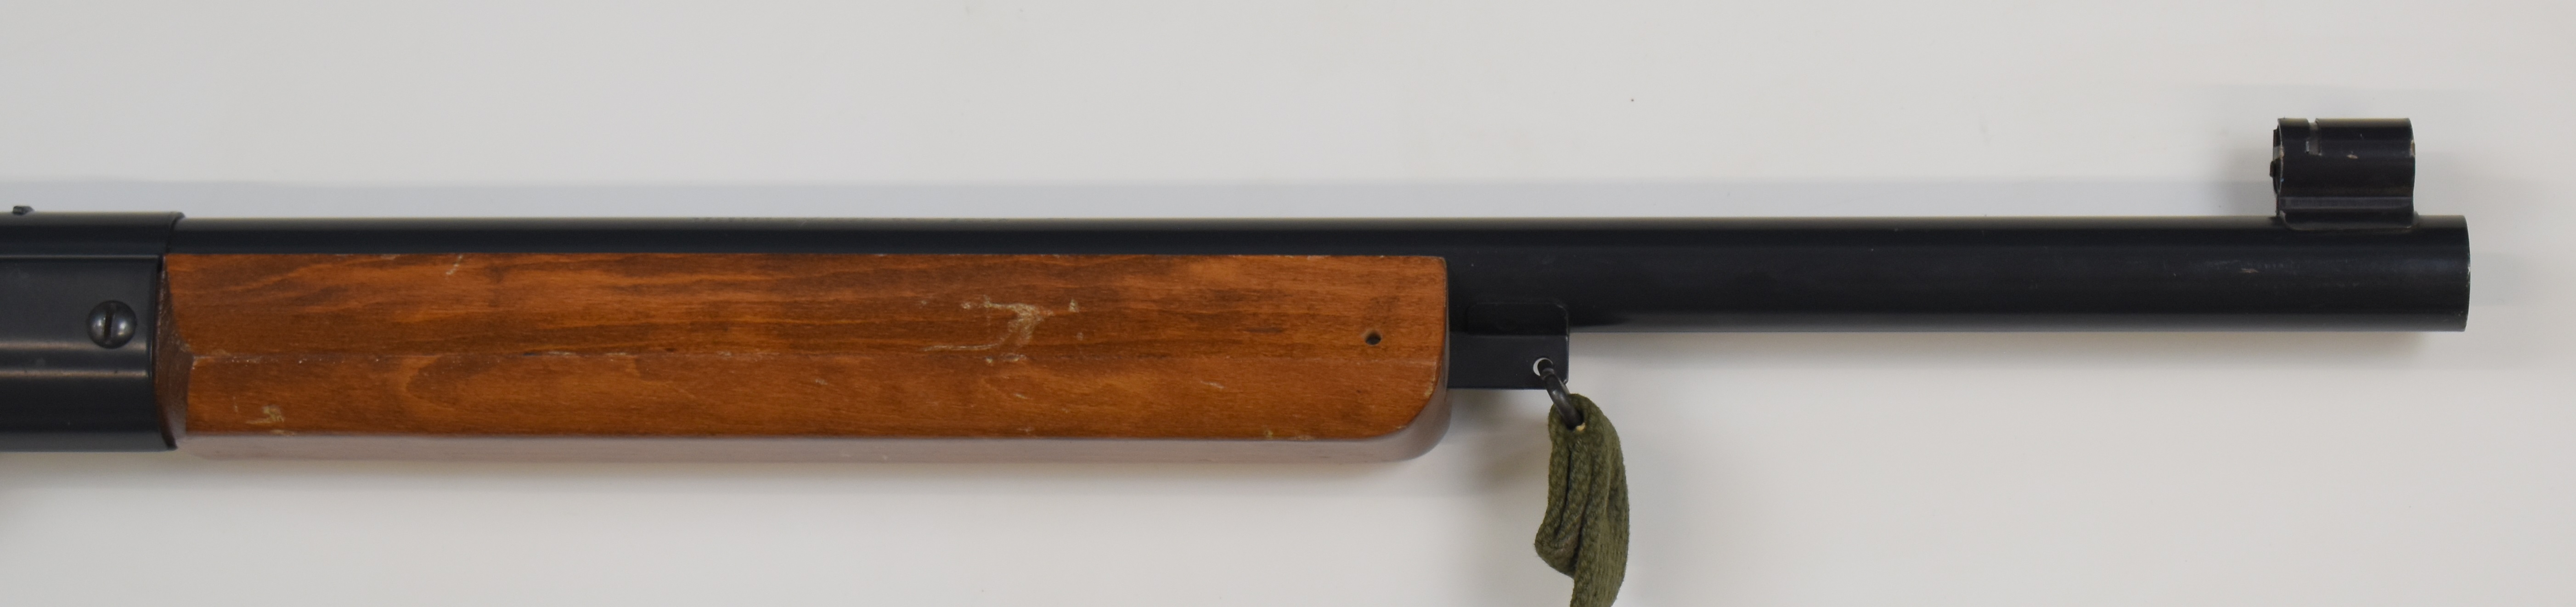 Daisy Model 99 Winchester style underlever-action air rifle with wooden grip and forend, canvas - Image 5 of 10